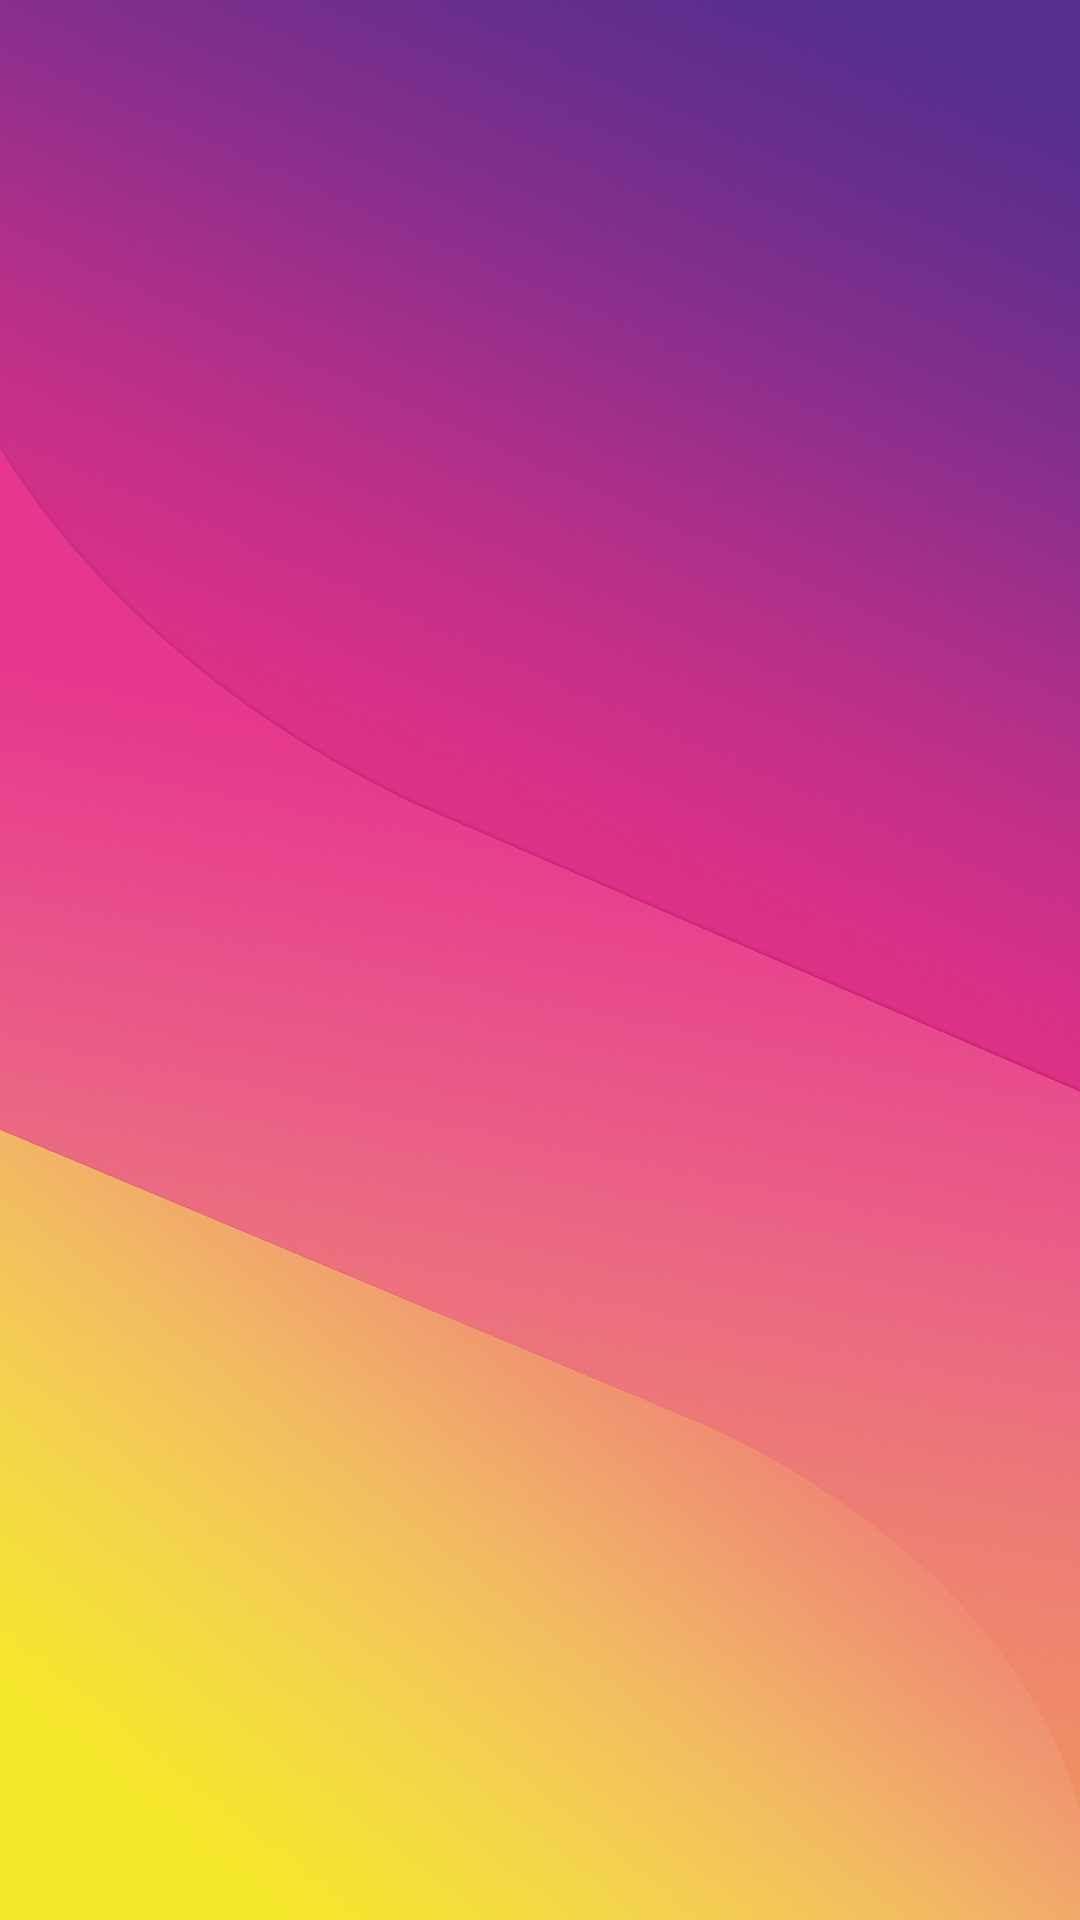 Oppo F1s Wallpapers HD